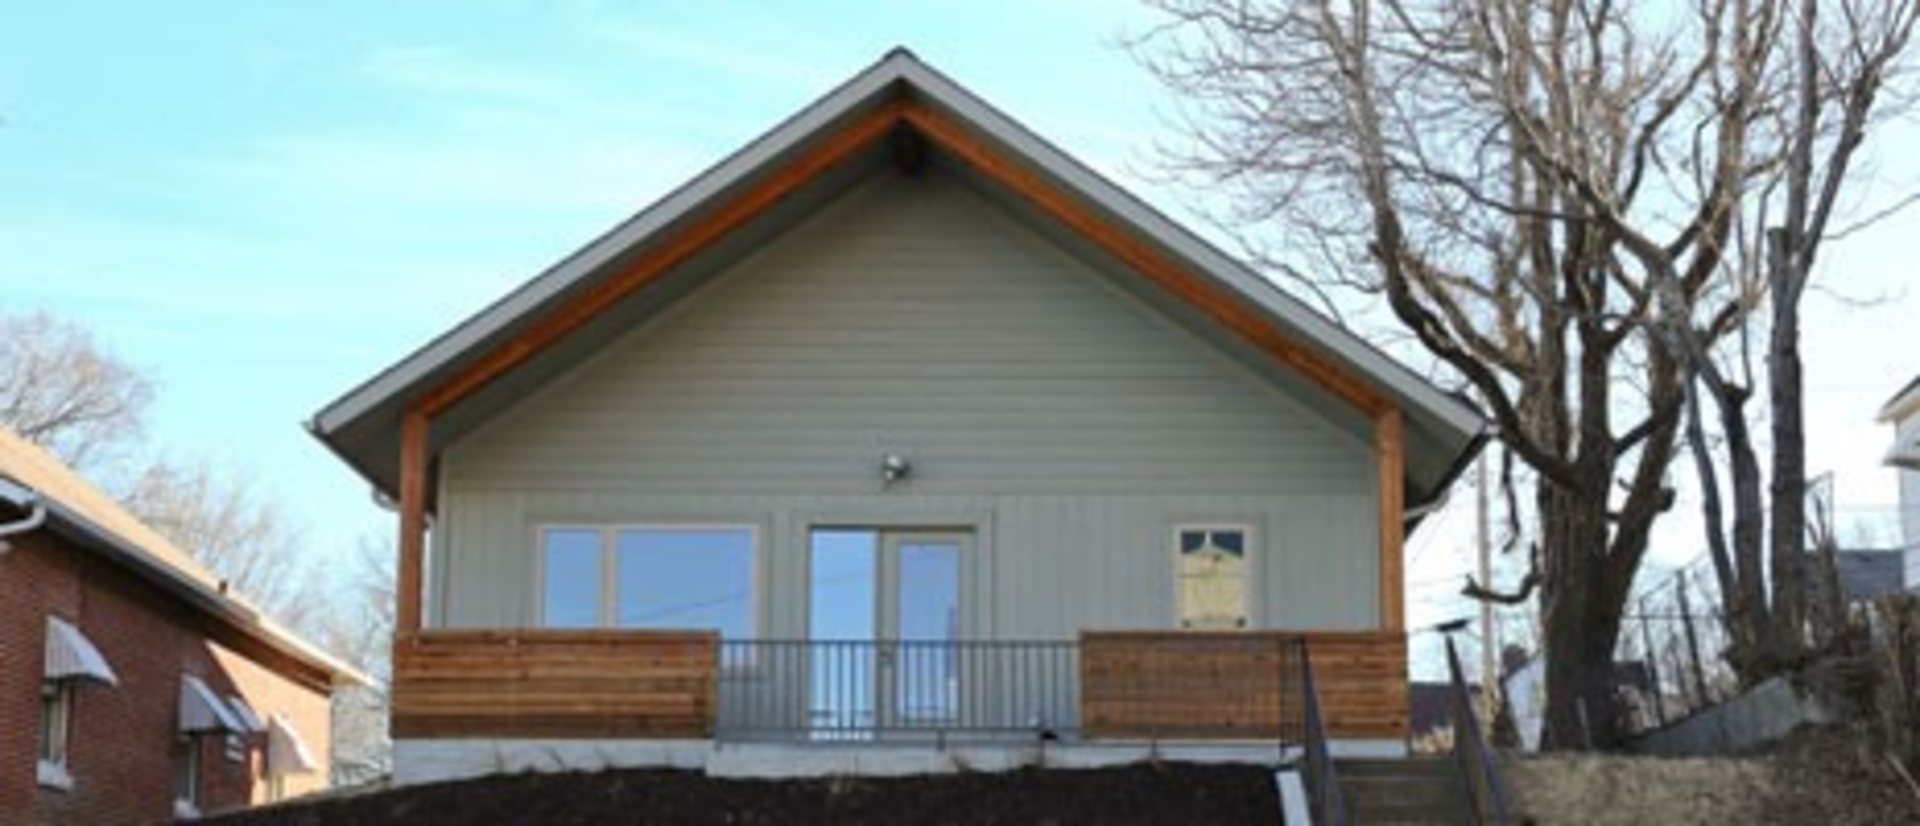 A New Energy Efficient House In Strawberry Hill Proves Downtown